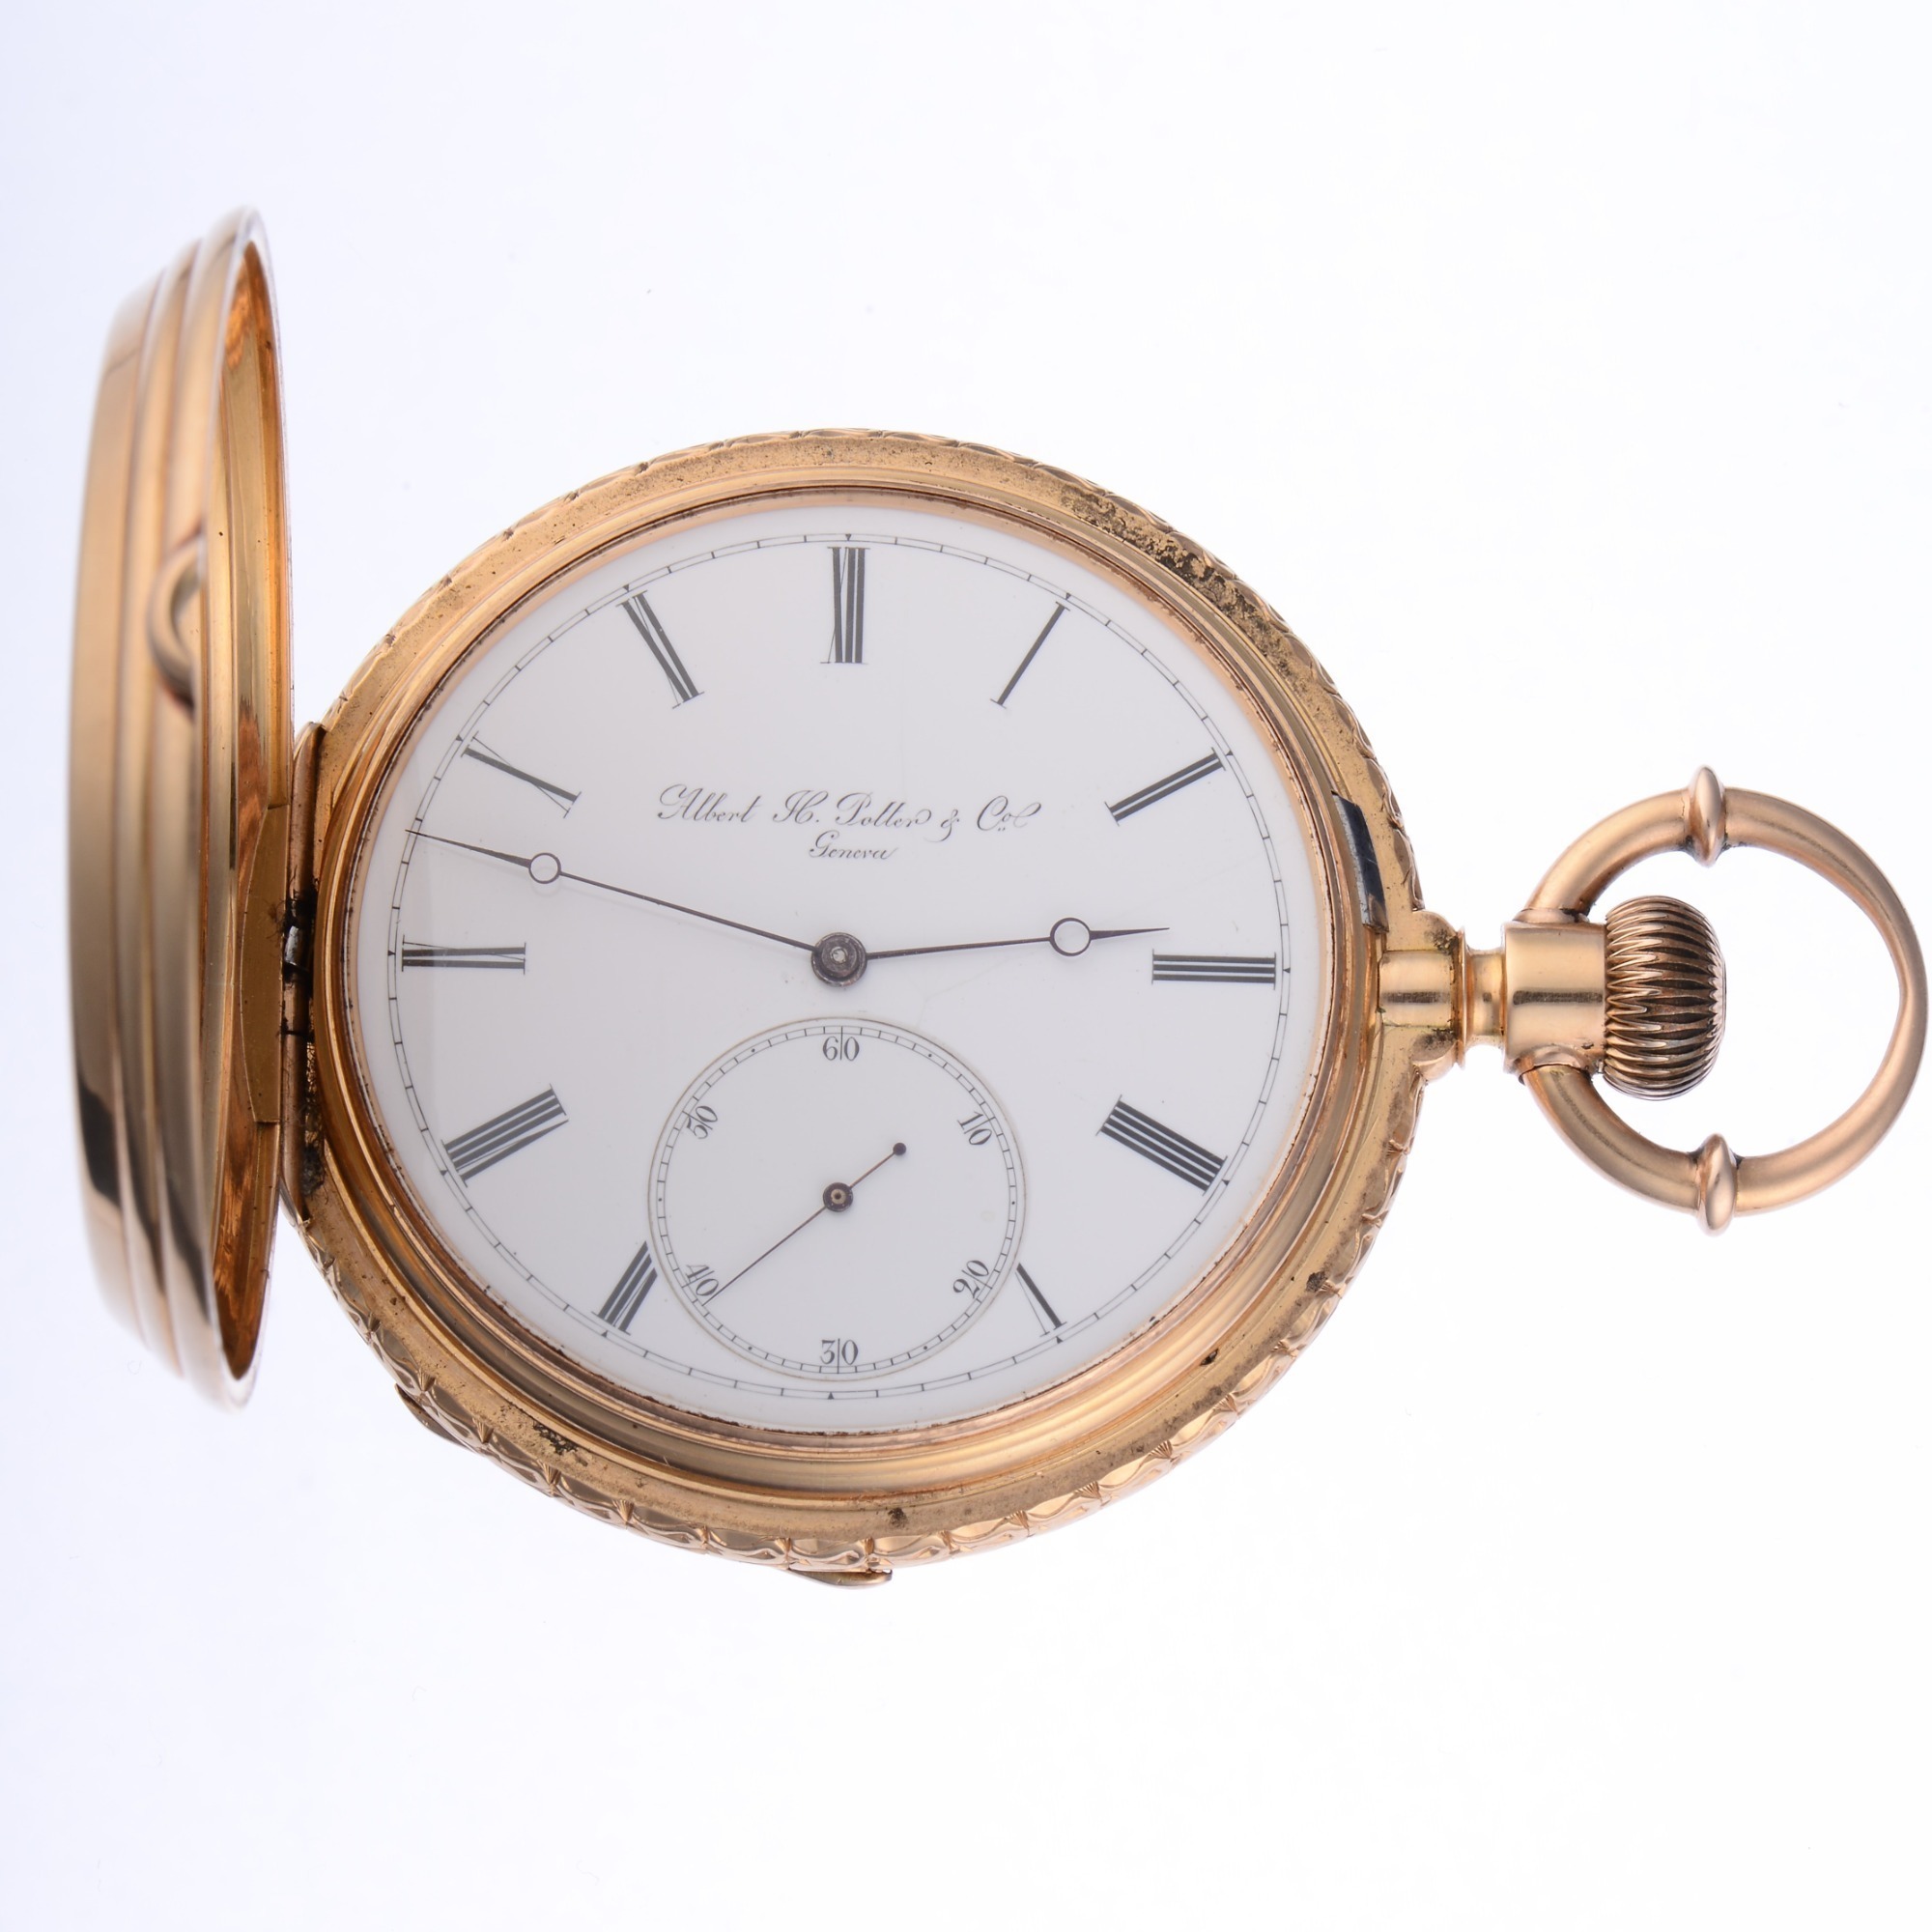 Rare and Important Early Albert H. Potter 18K Gold Hunting Case Pocket Watch